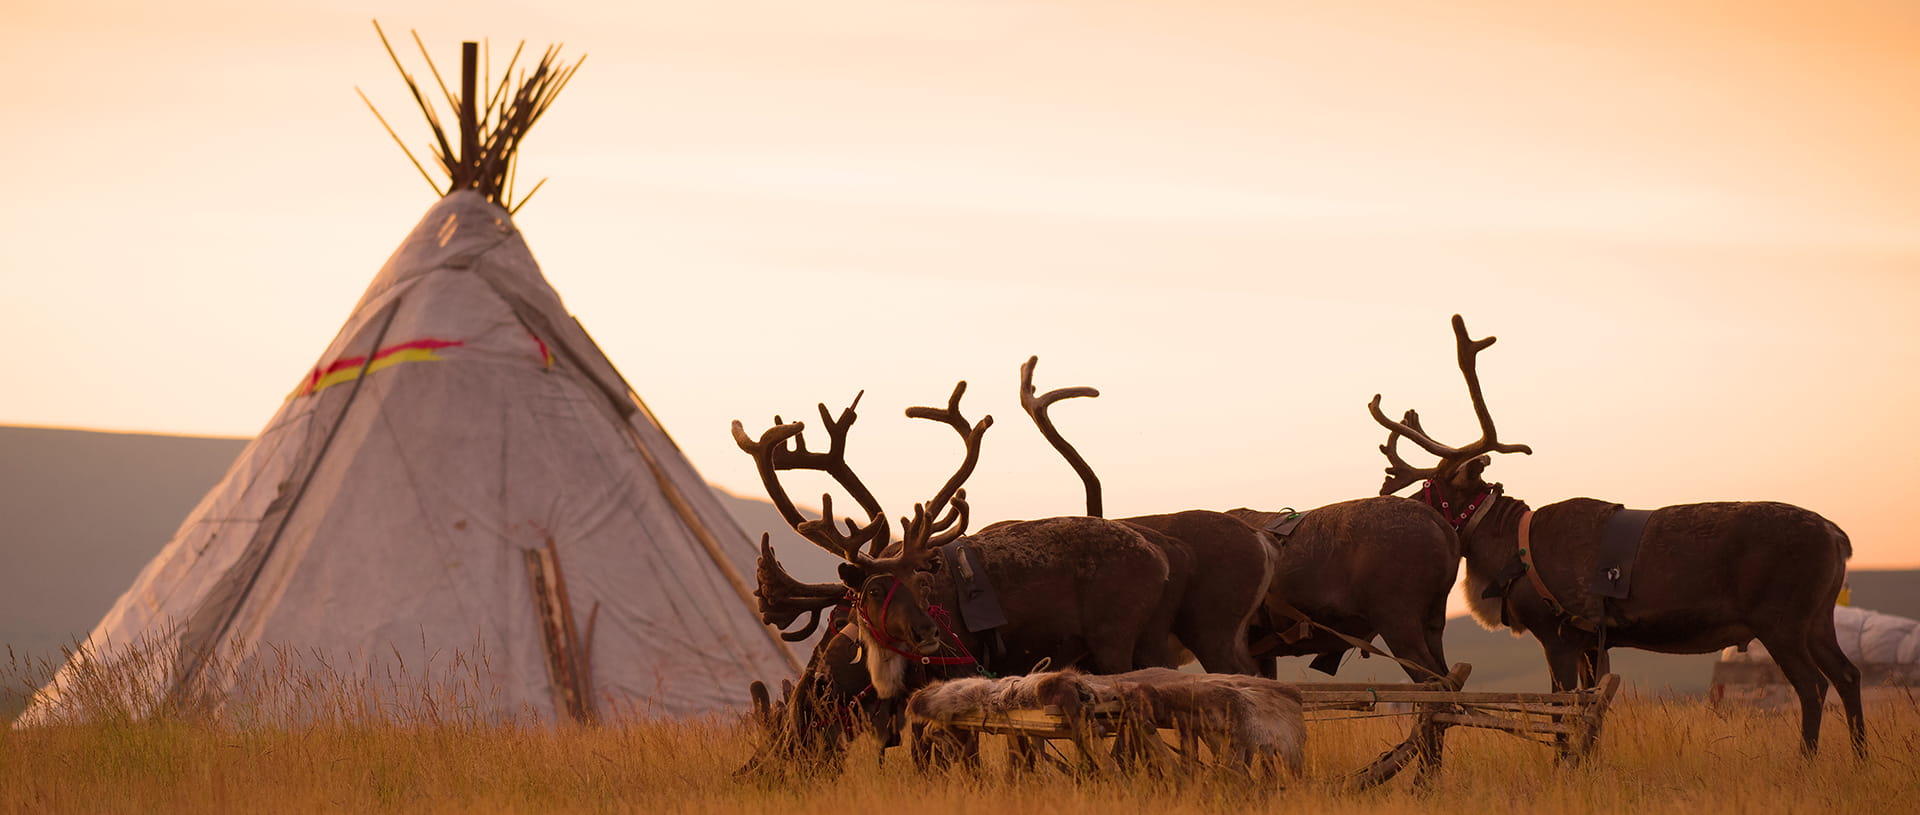 Reindeer sledding at the reindeer herders camp on the background of the sunrise. Yamal, Russia